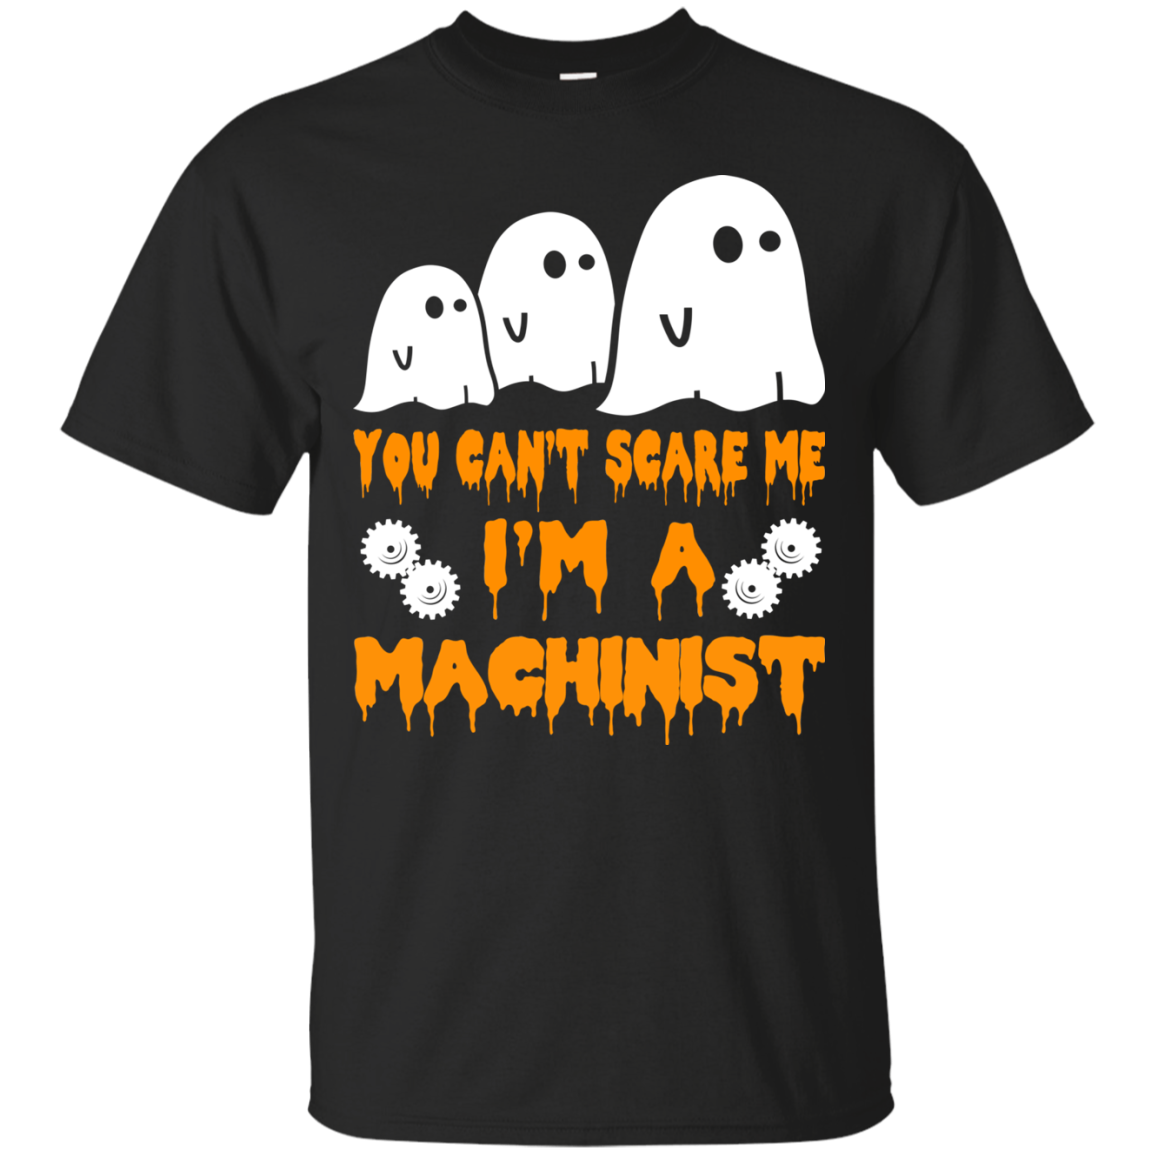 You can’t scare me I'm a Machinist shirt, hoodie, tank